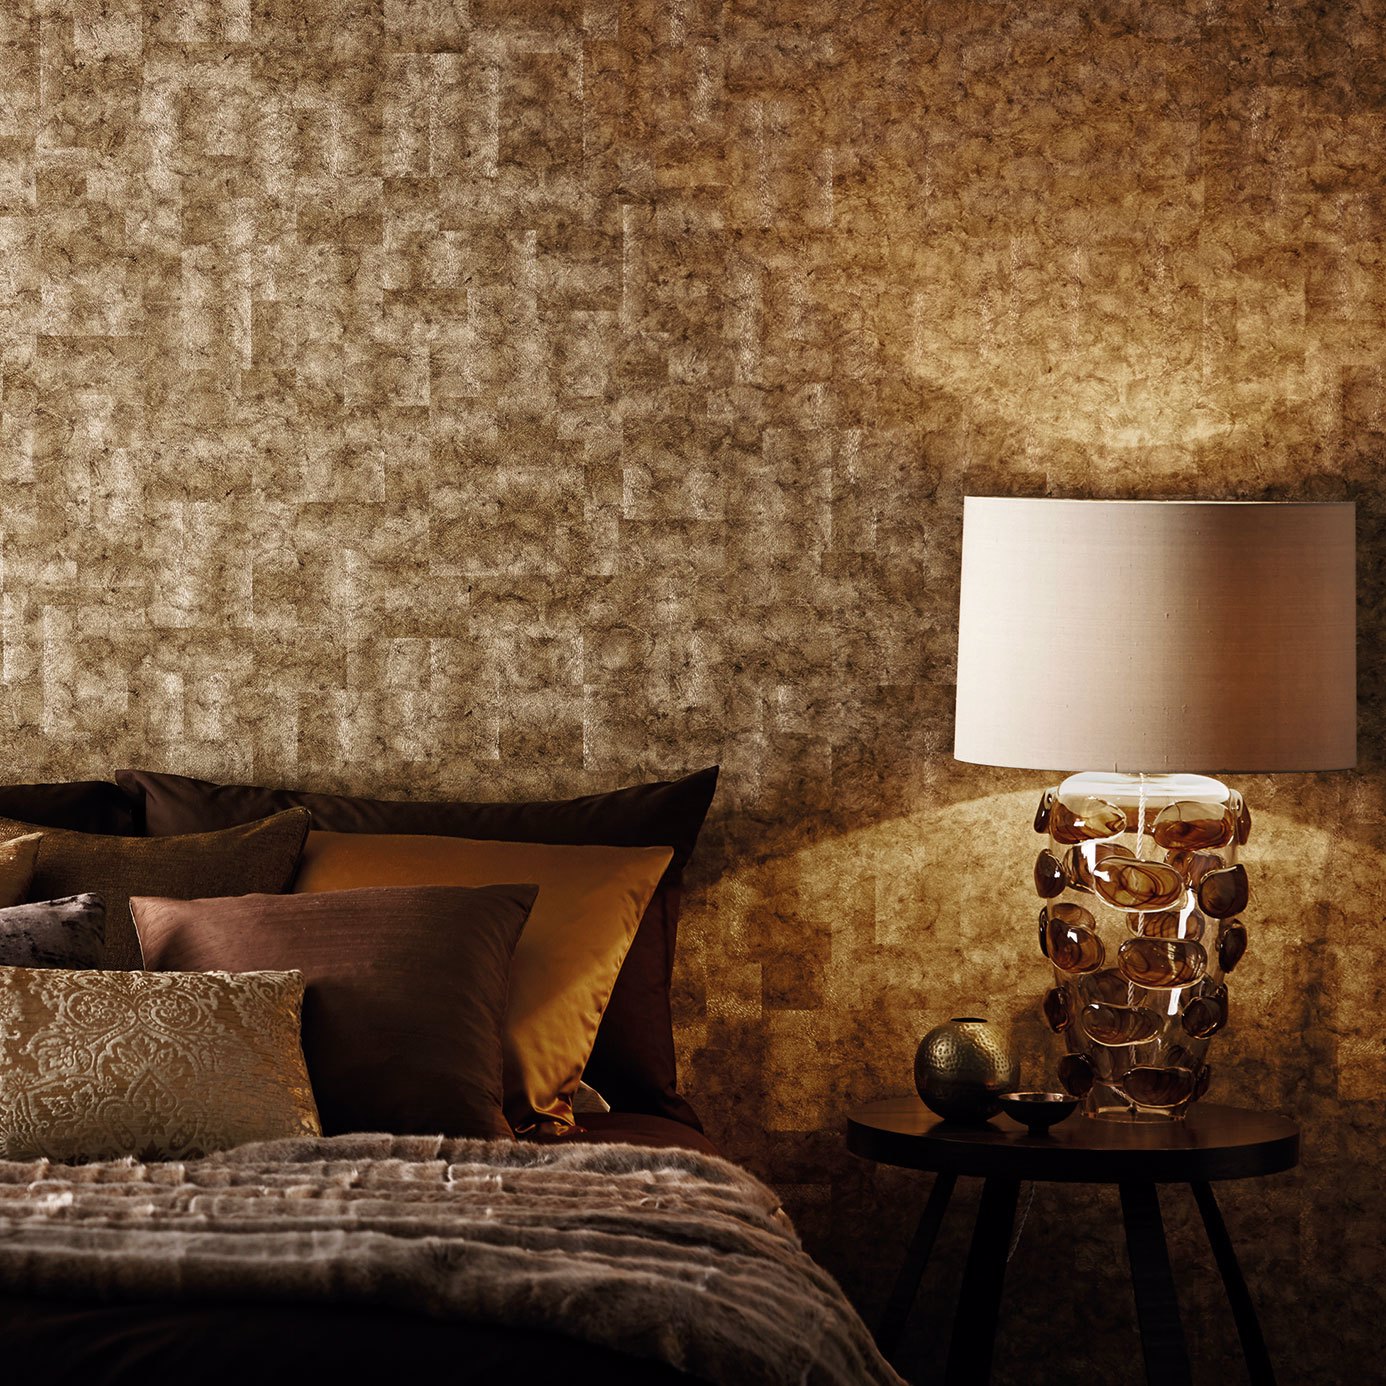 Anthology Marble Truffle Wallpaper by HAR